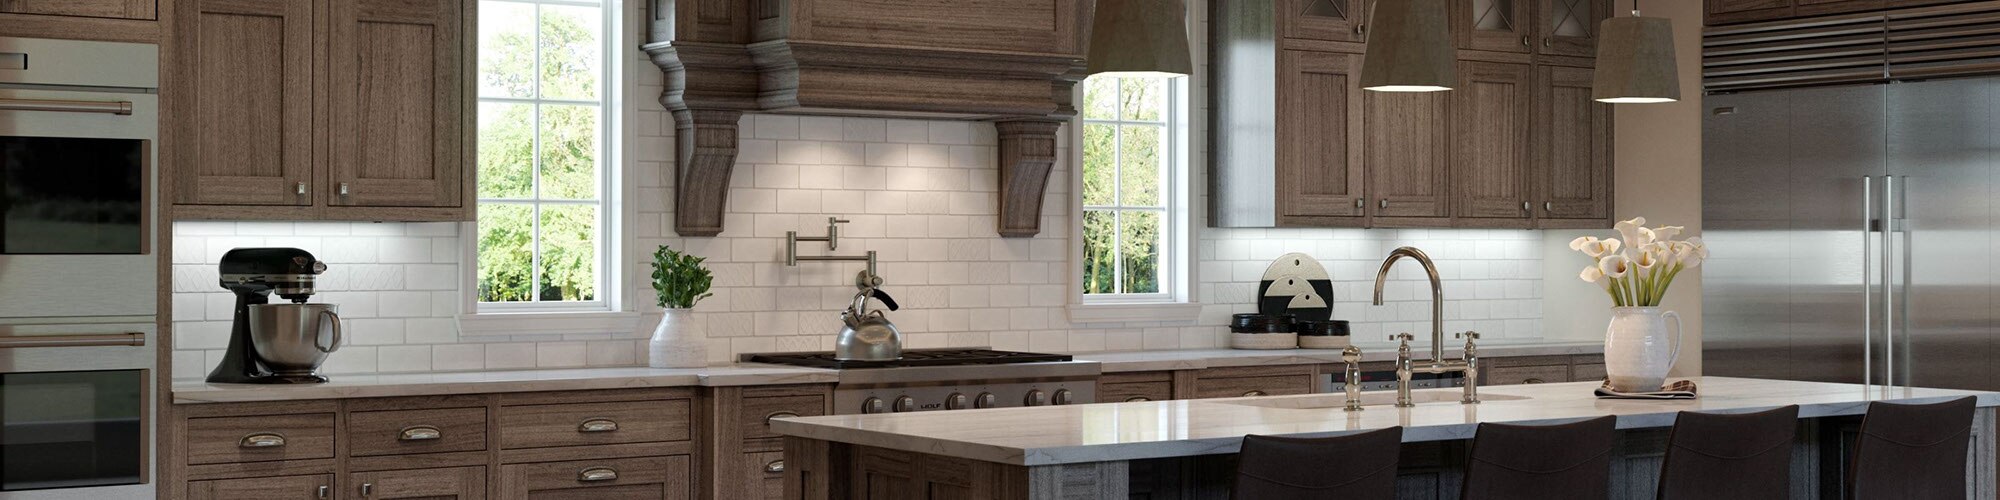 Modern farmhouse kitchen with off-white subway tile, off-white quartzite countertop, and natural wood cabinets.